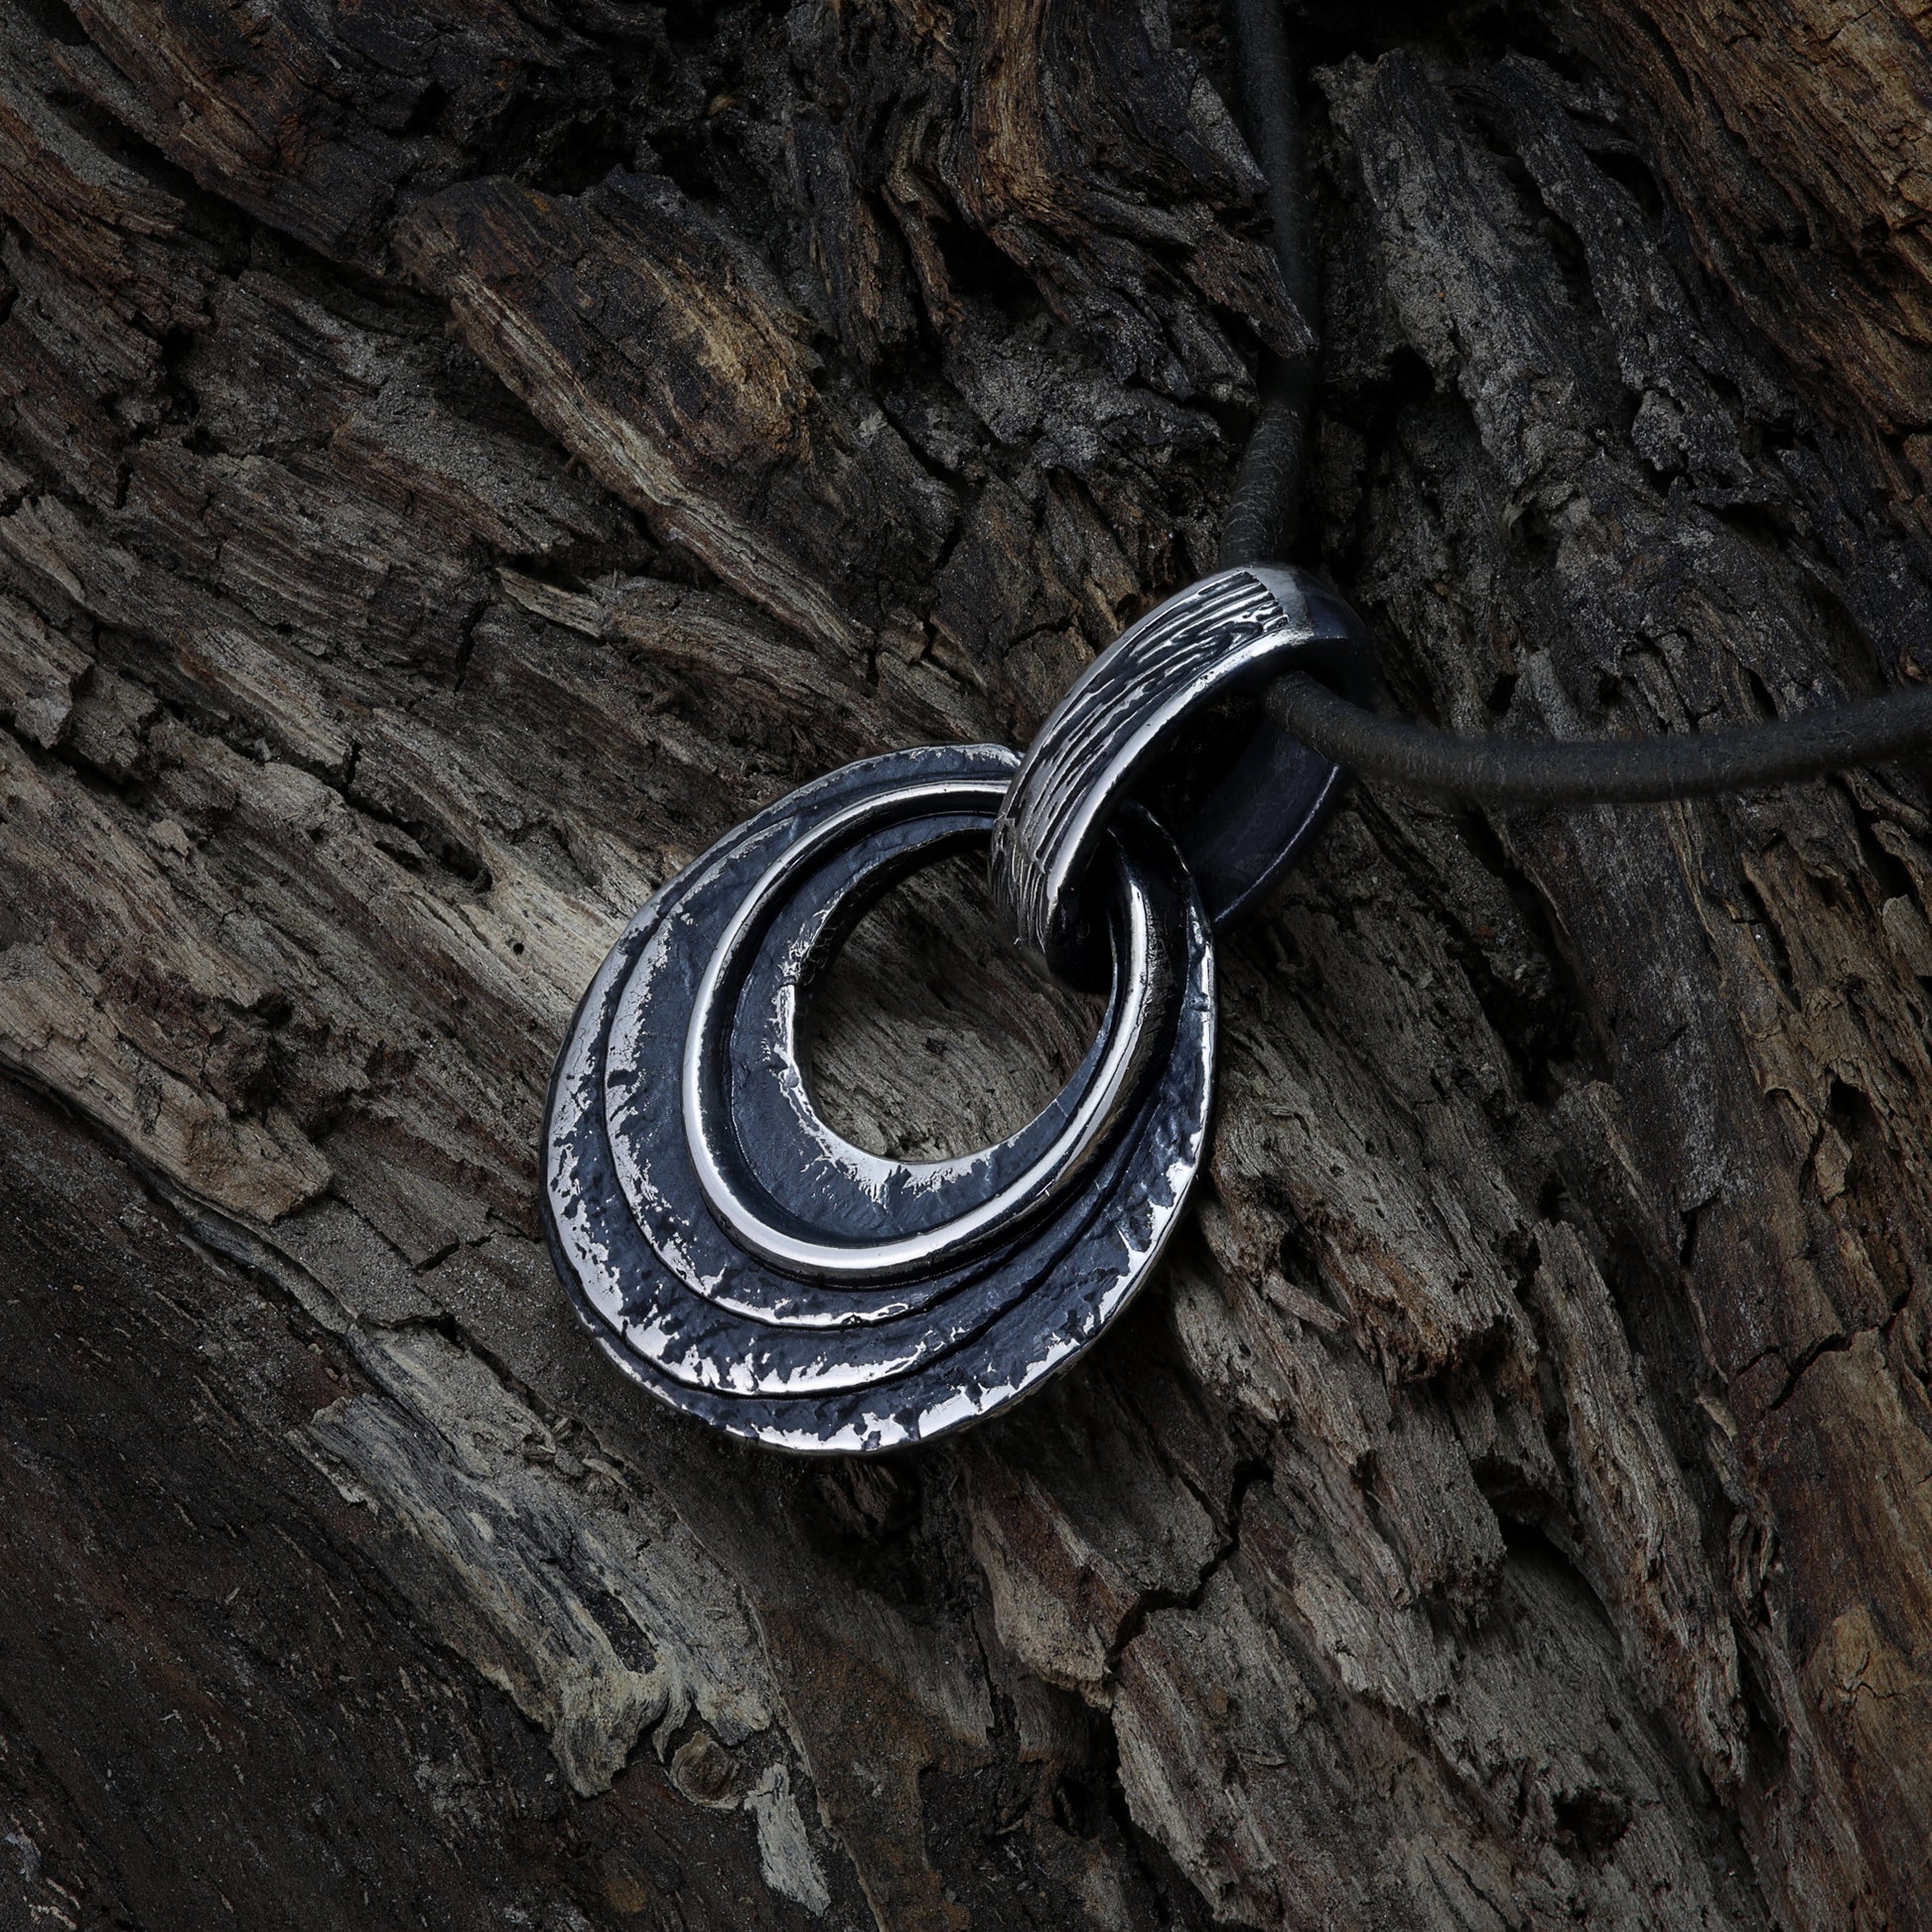 A textured, layered sterling silver pendant featuring two concentric circles, strung on a black leather cord, set against an ancient, weathered tree bark.